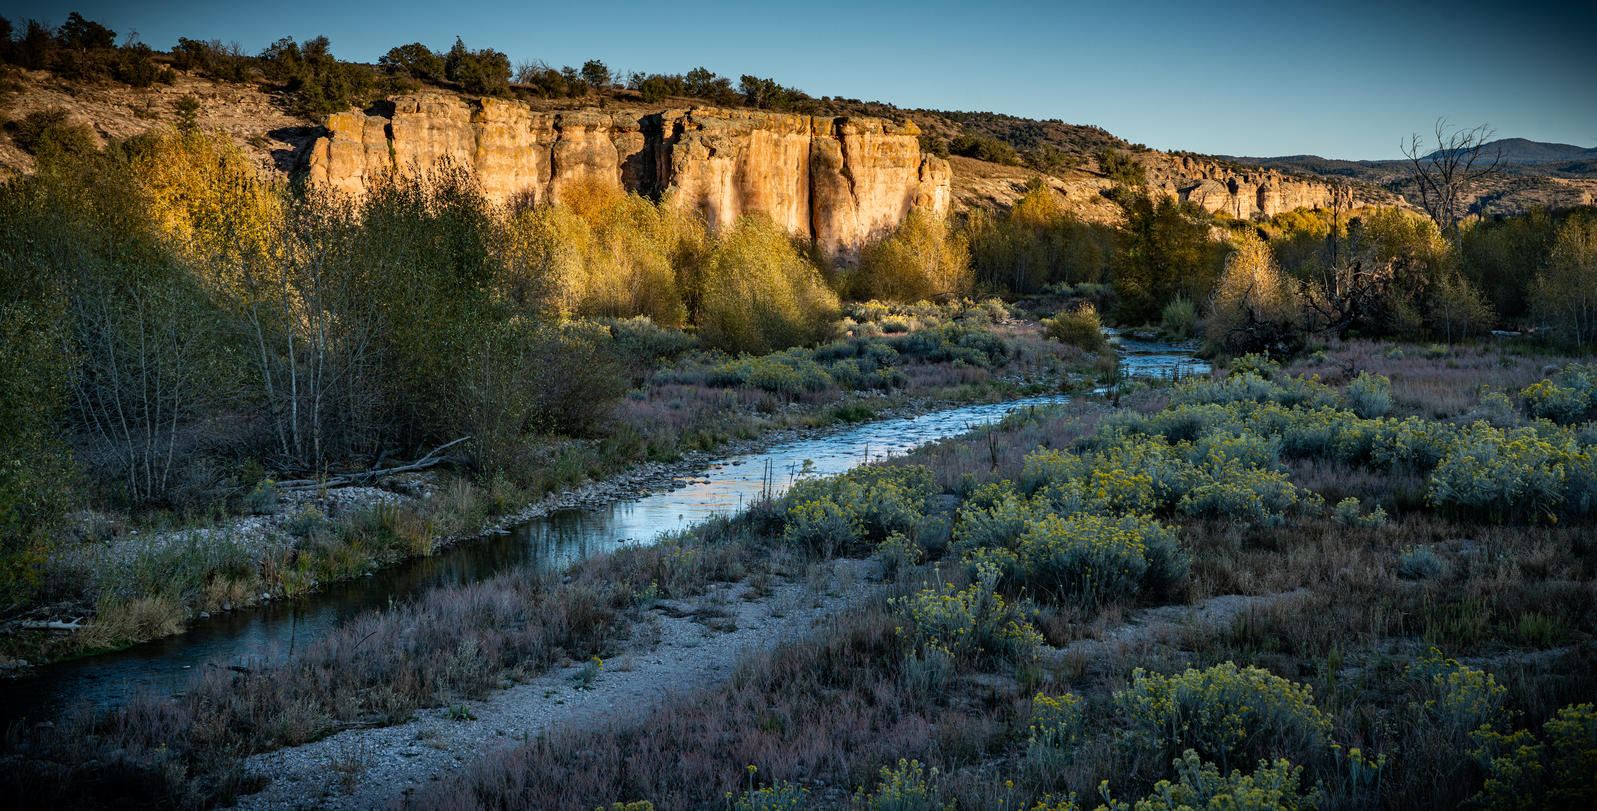 A stretch of the Gila River running next to a canyon hit by golden hour sunlight.